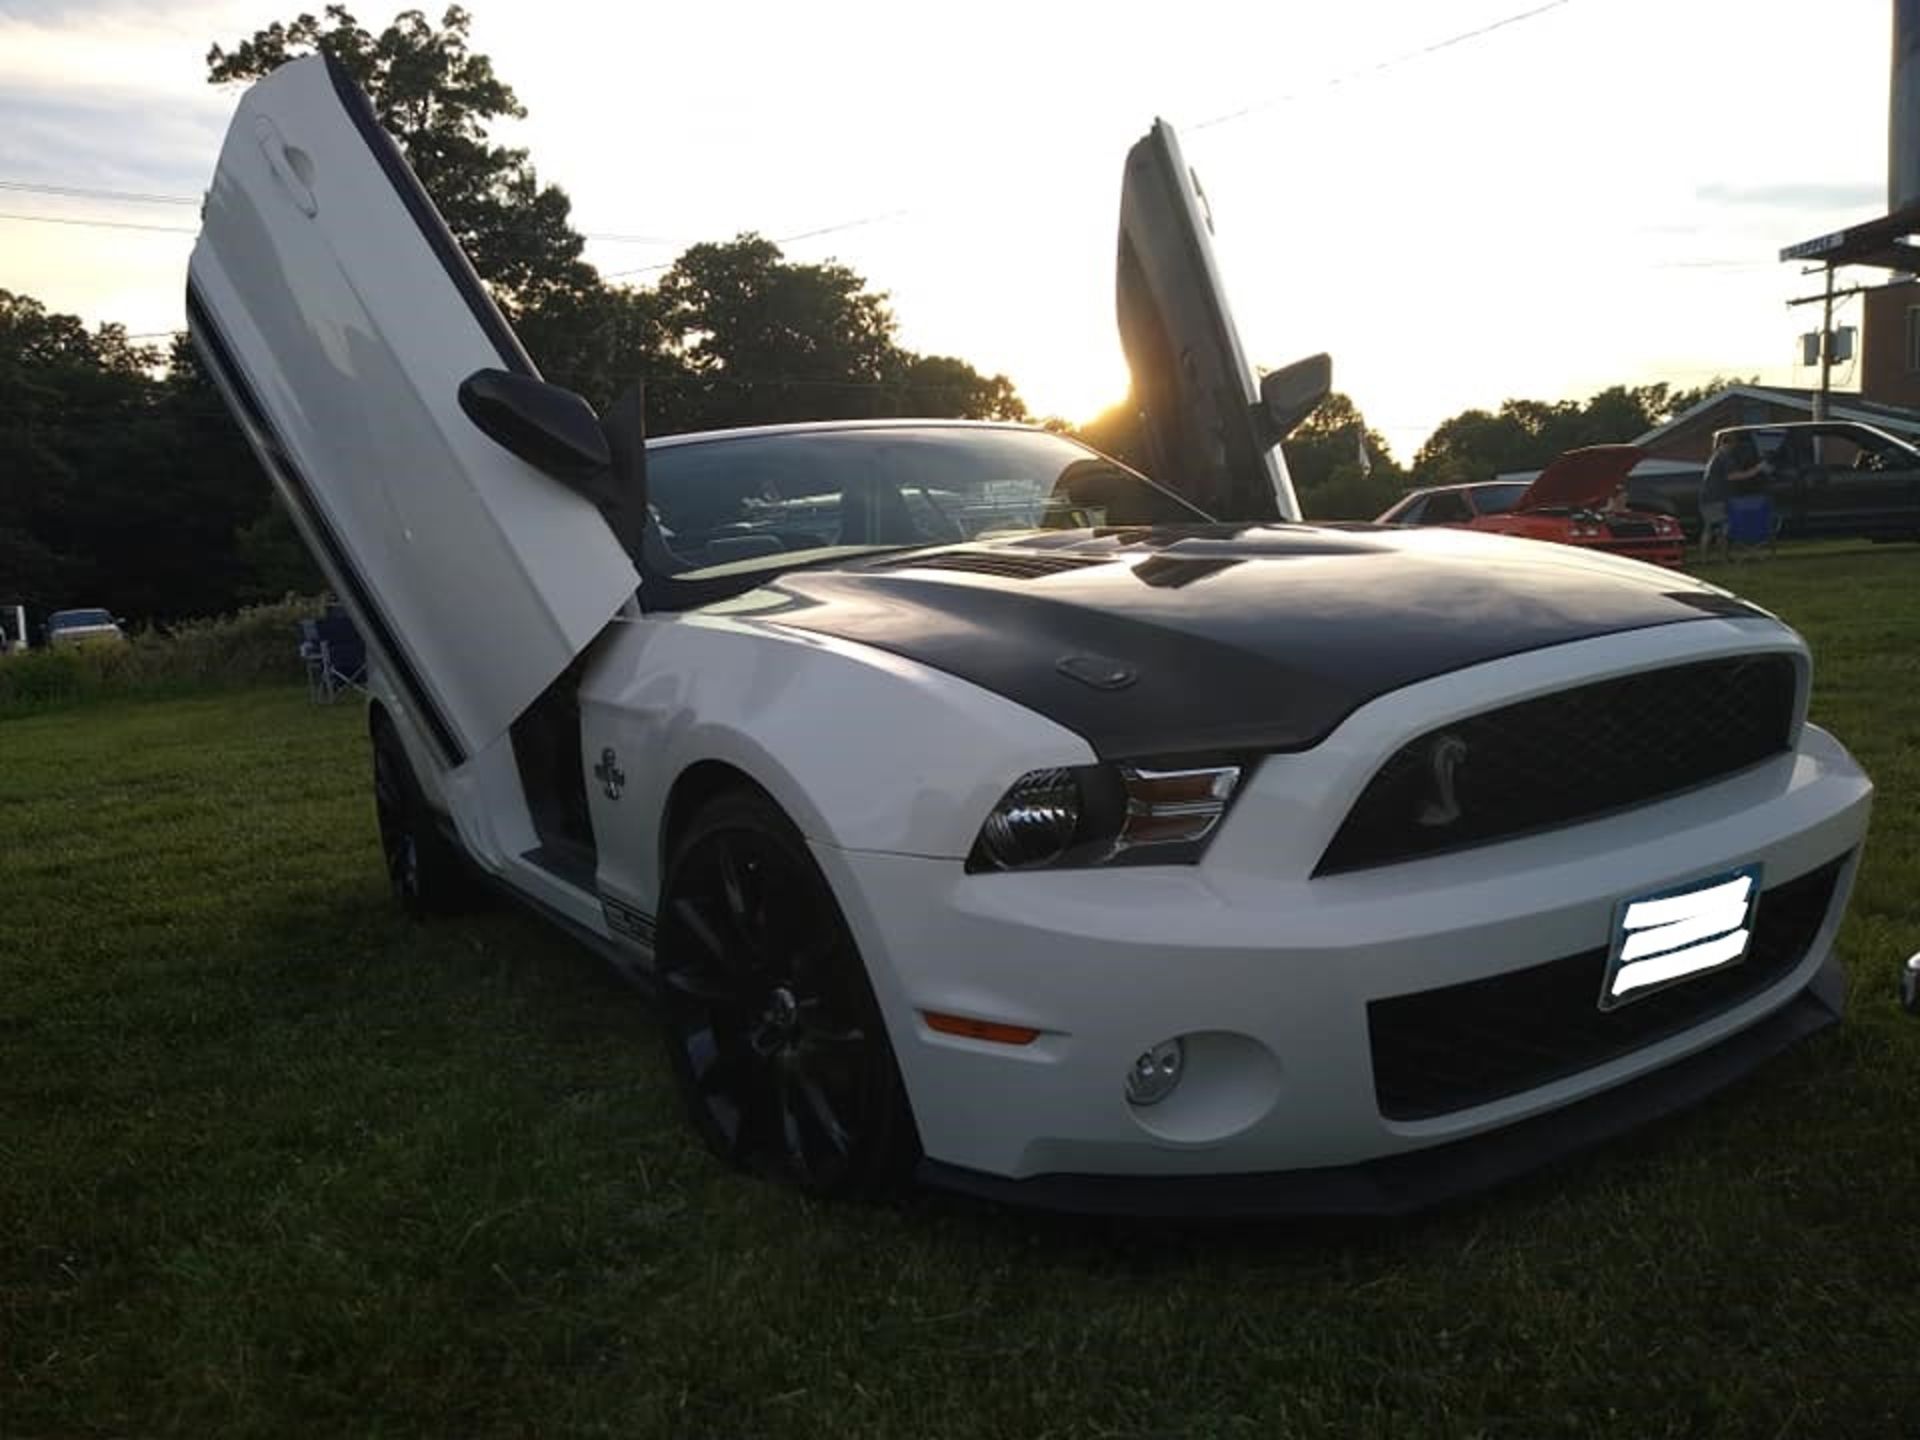 2010 Ford Mustang Custom GT500 Tribute Convertible - Image 6 of 12